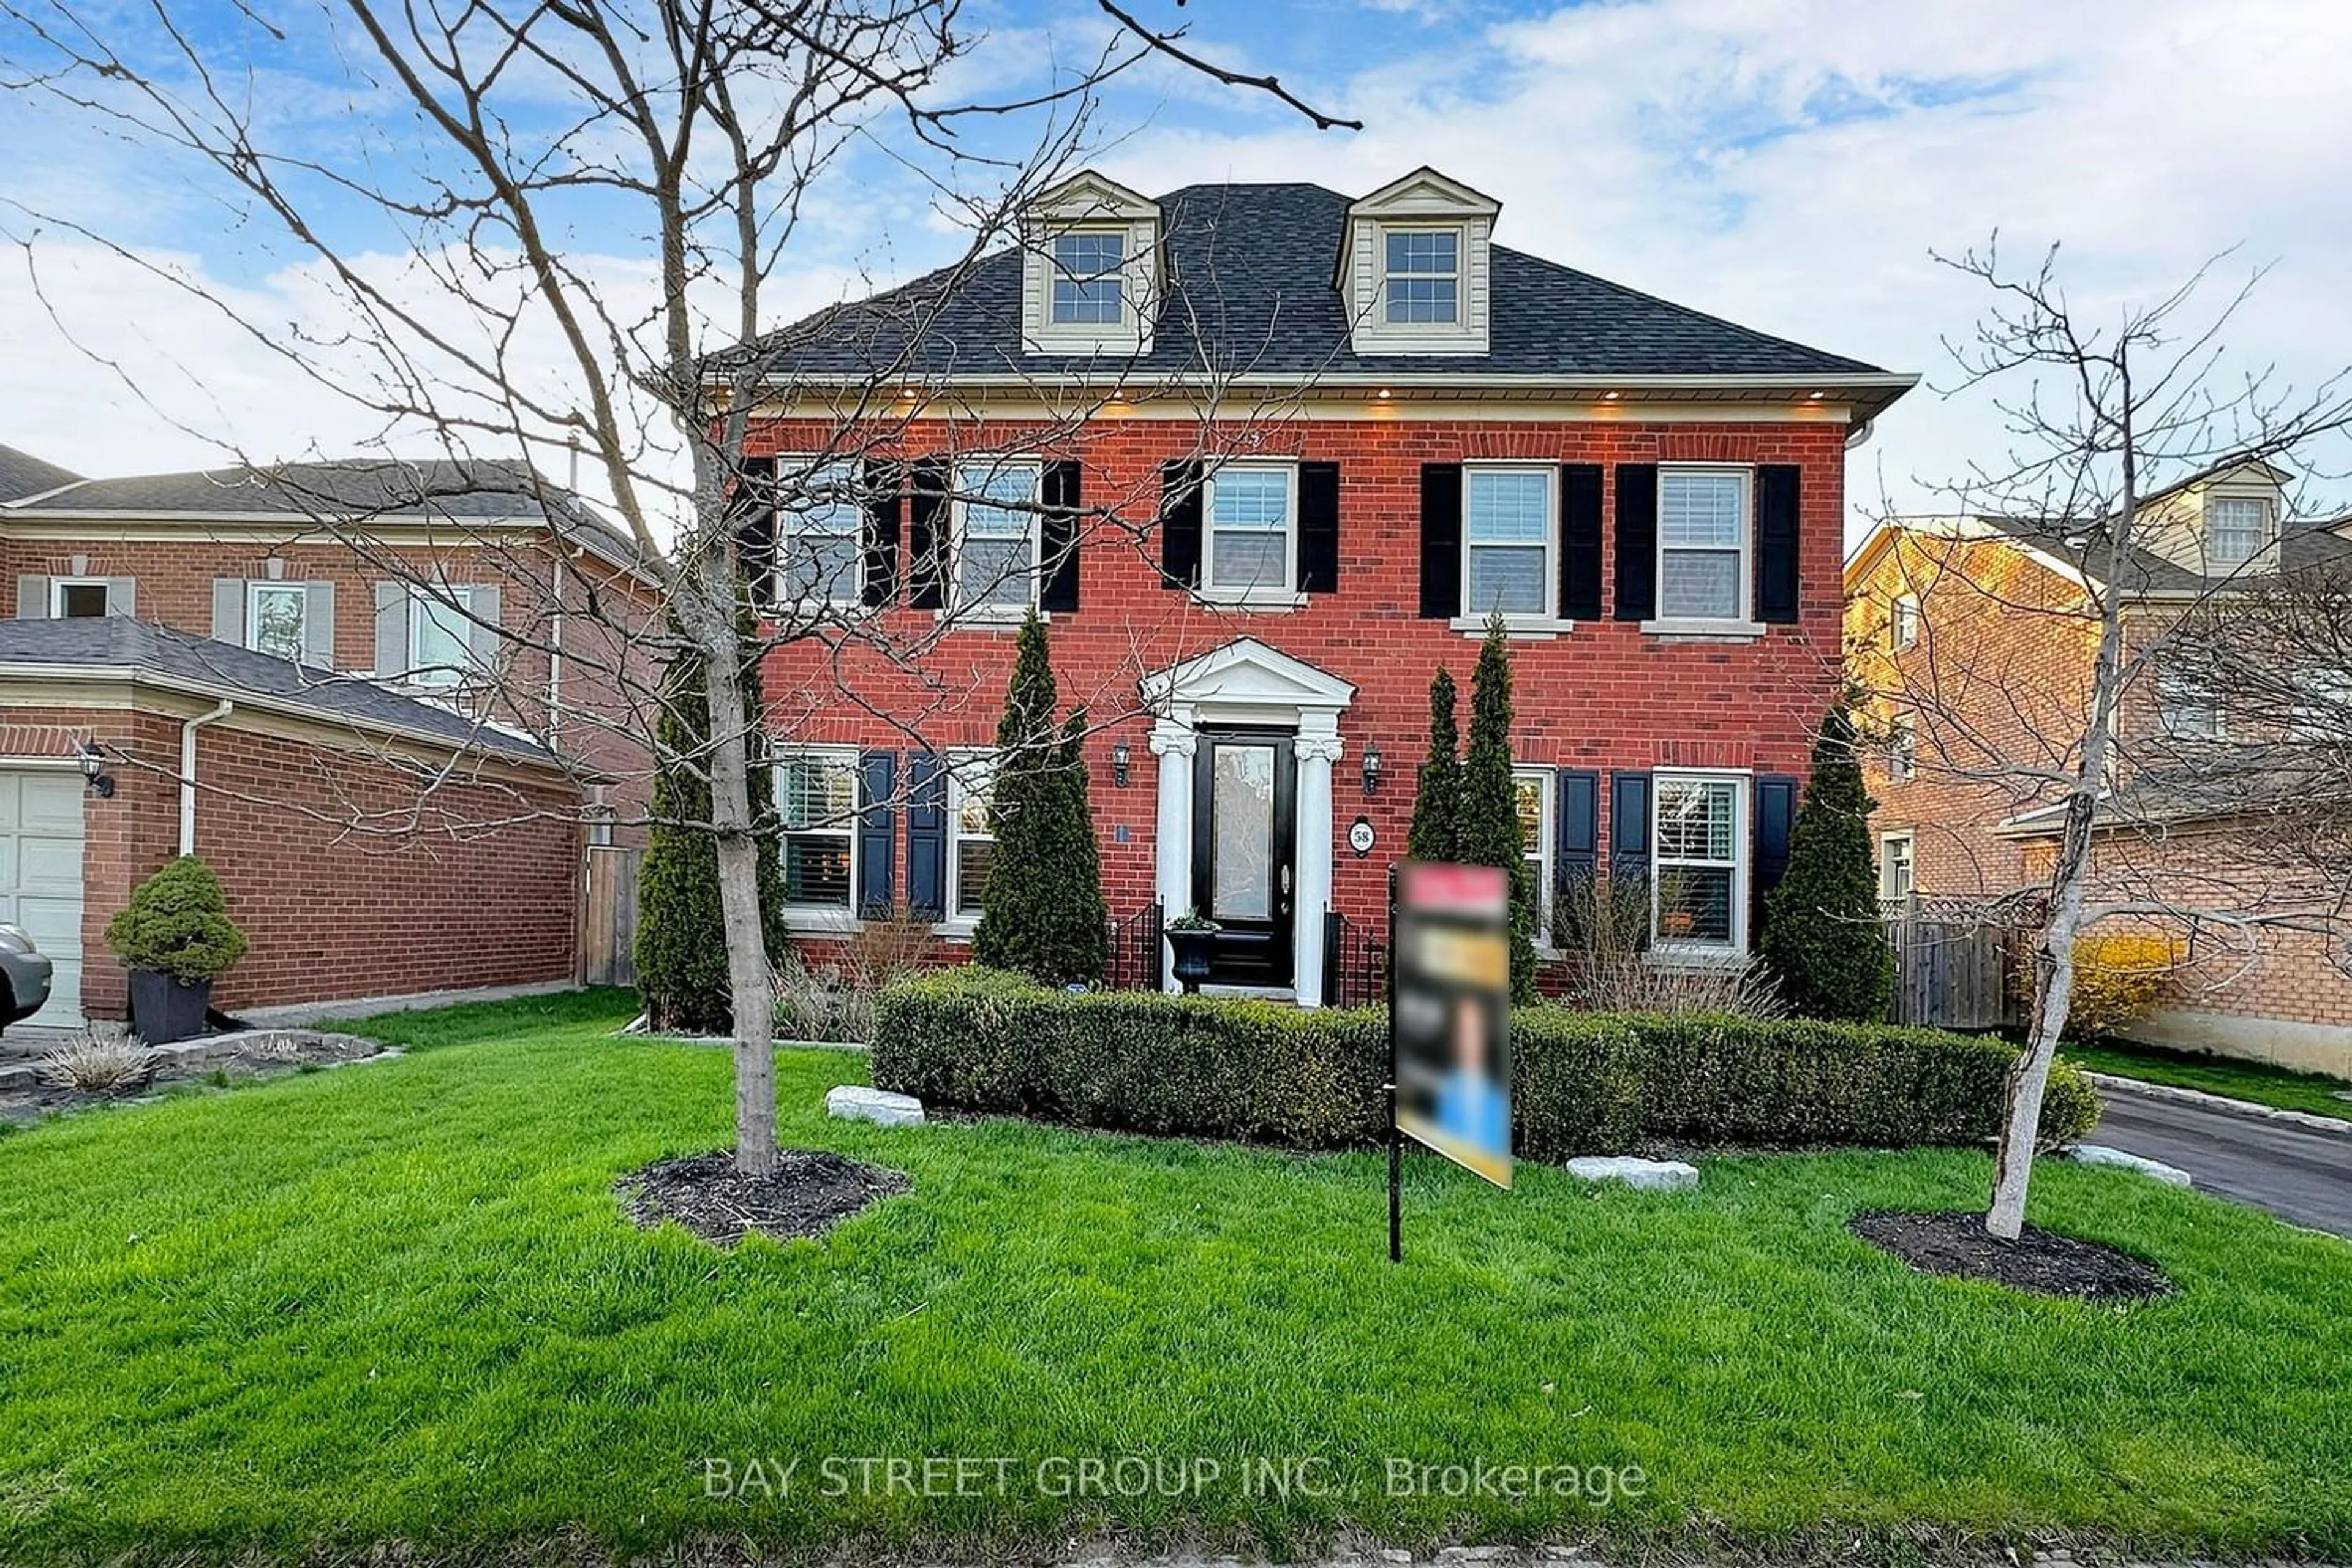 Home with brick exterior material for 58 Regent St, Richmond Hill Ontario L4C 9C3